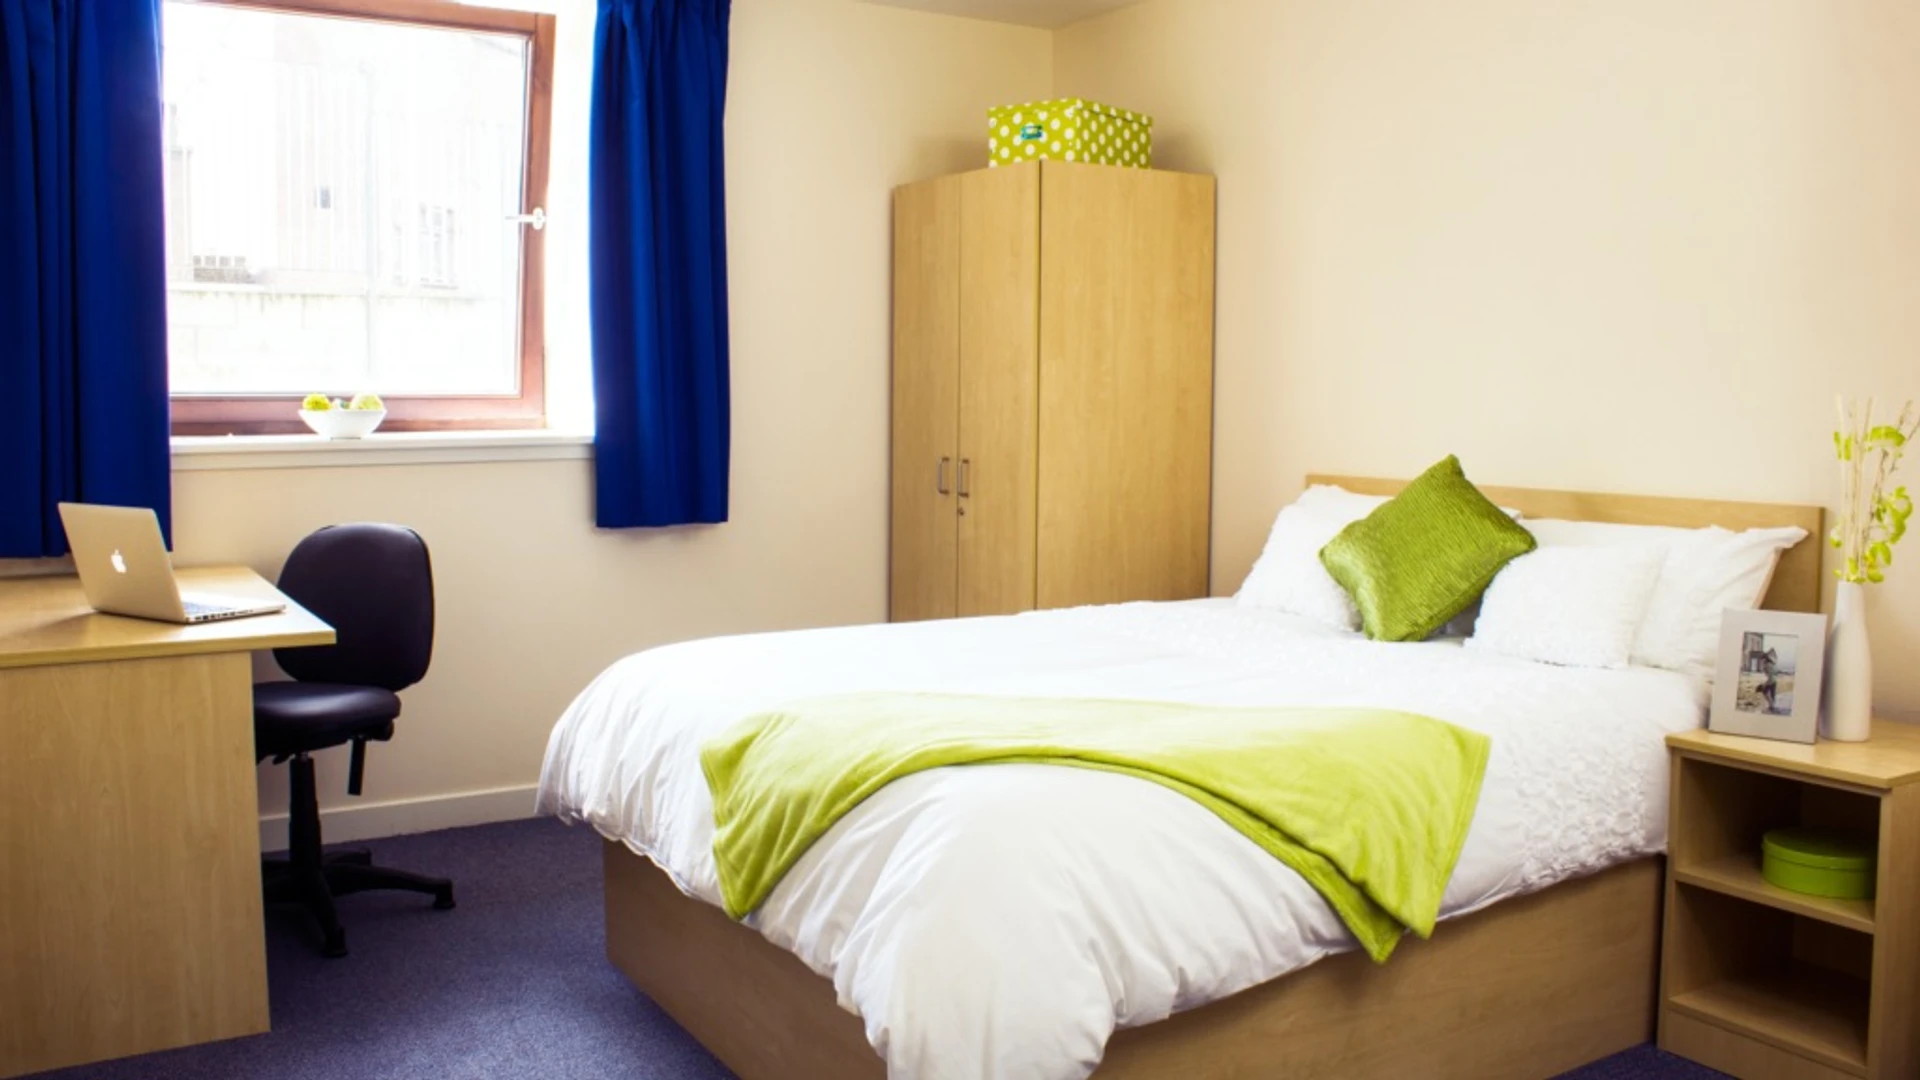 Accommodation in the centre of Dundee